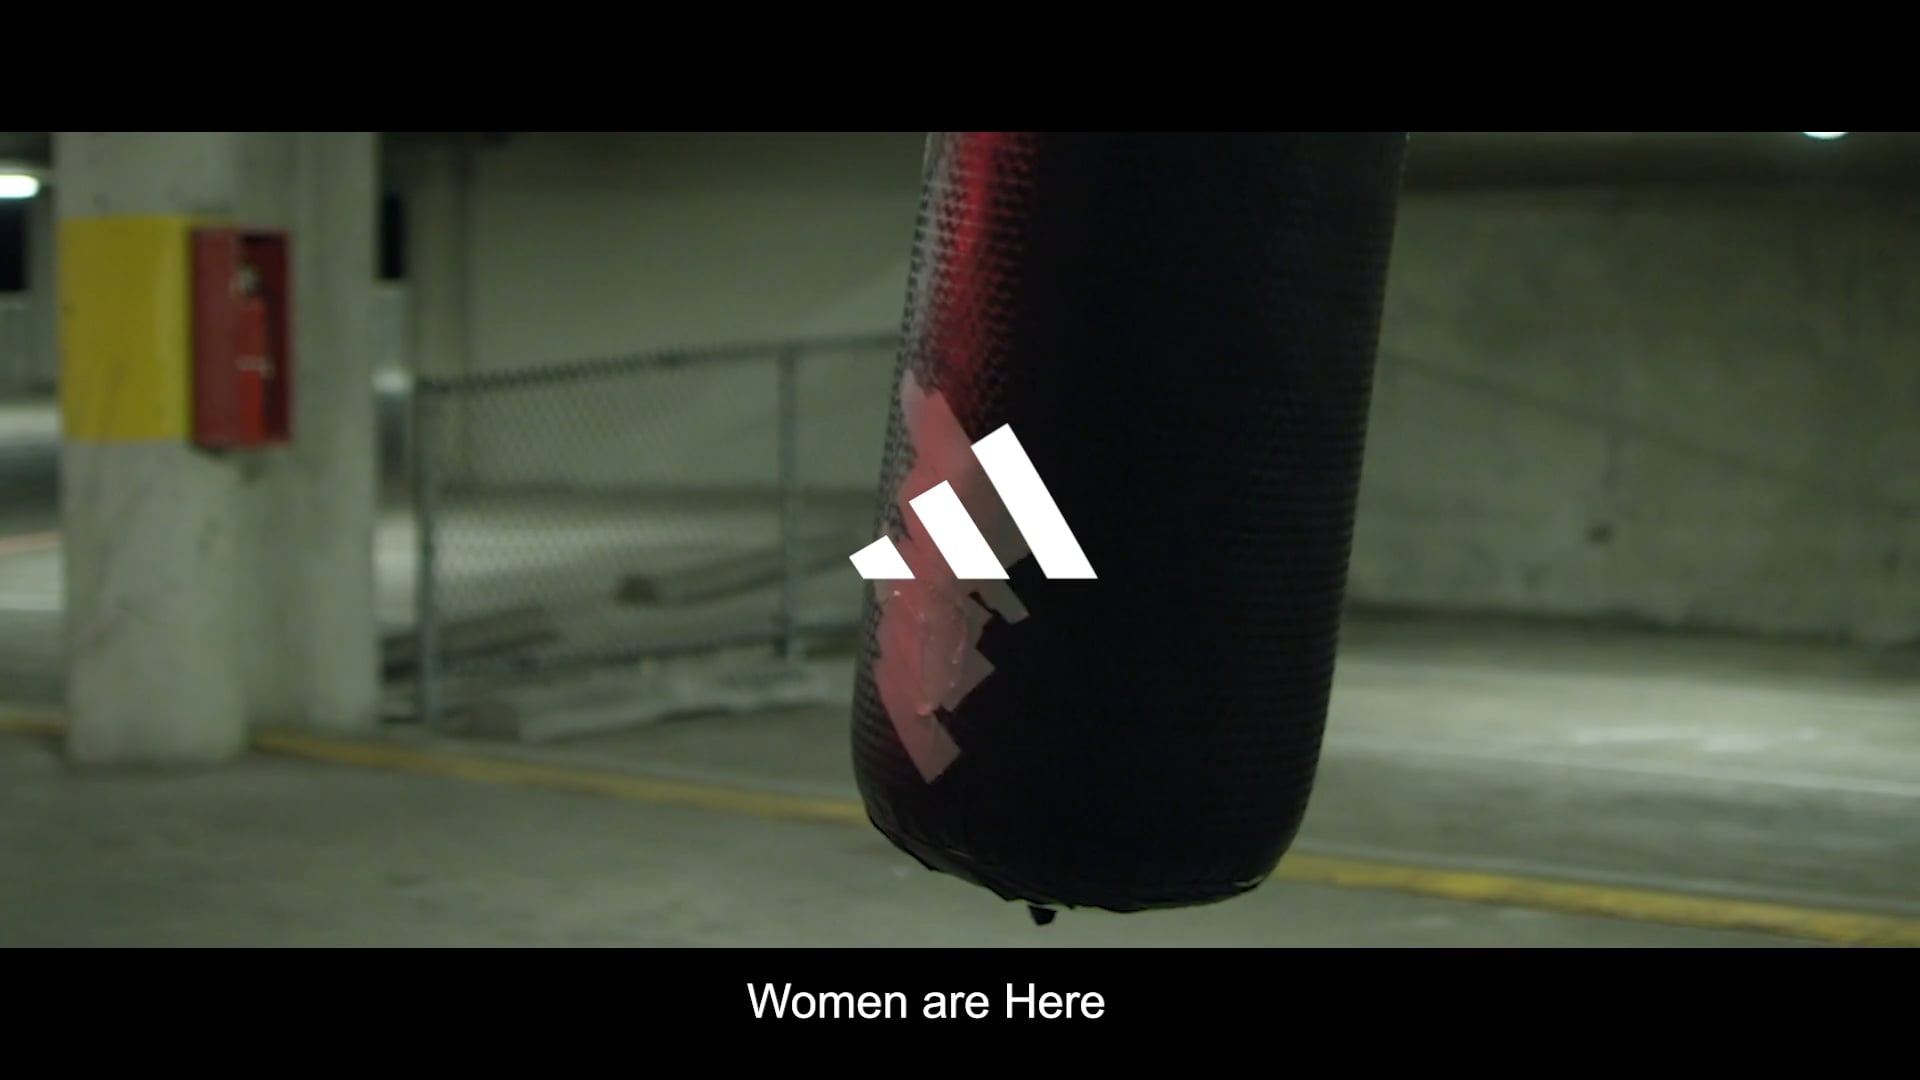 Adidas: Women are Here